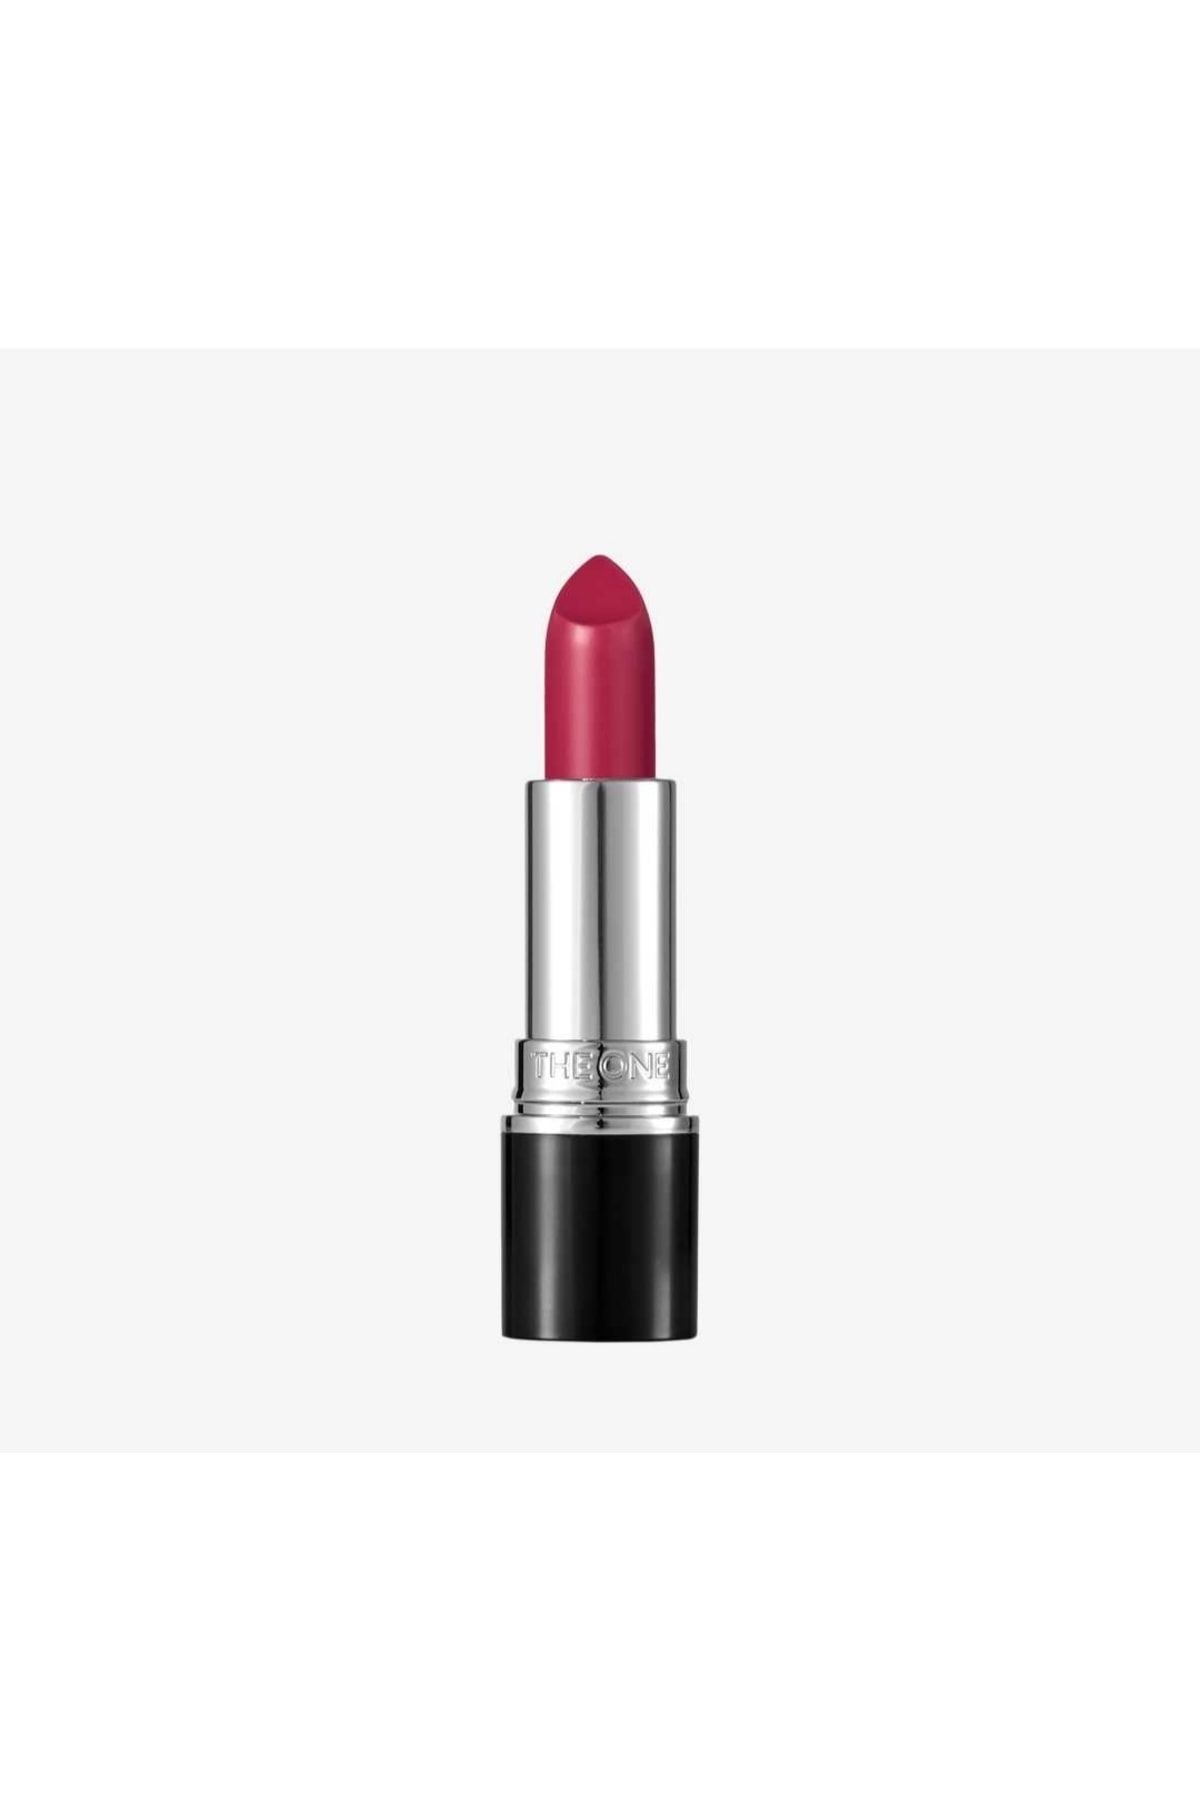 Oriflame The One Colour Stylist Ultimate Ruj 37657 Cranberry Crush